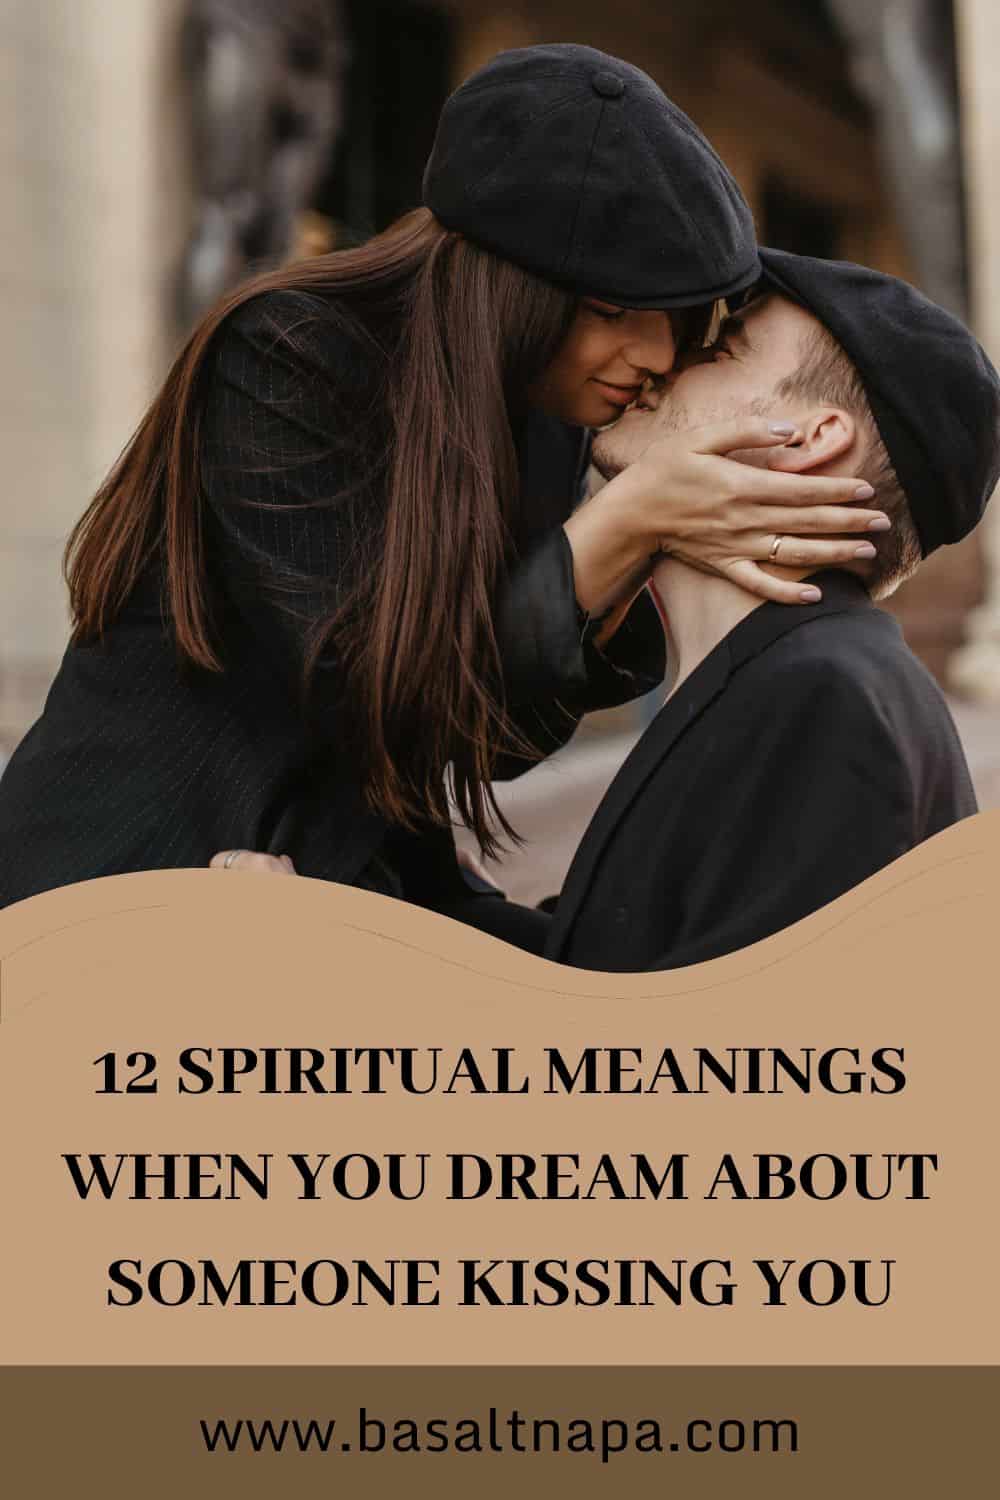 12 Spiritual Meanings When You Dream About Someone Kissing You